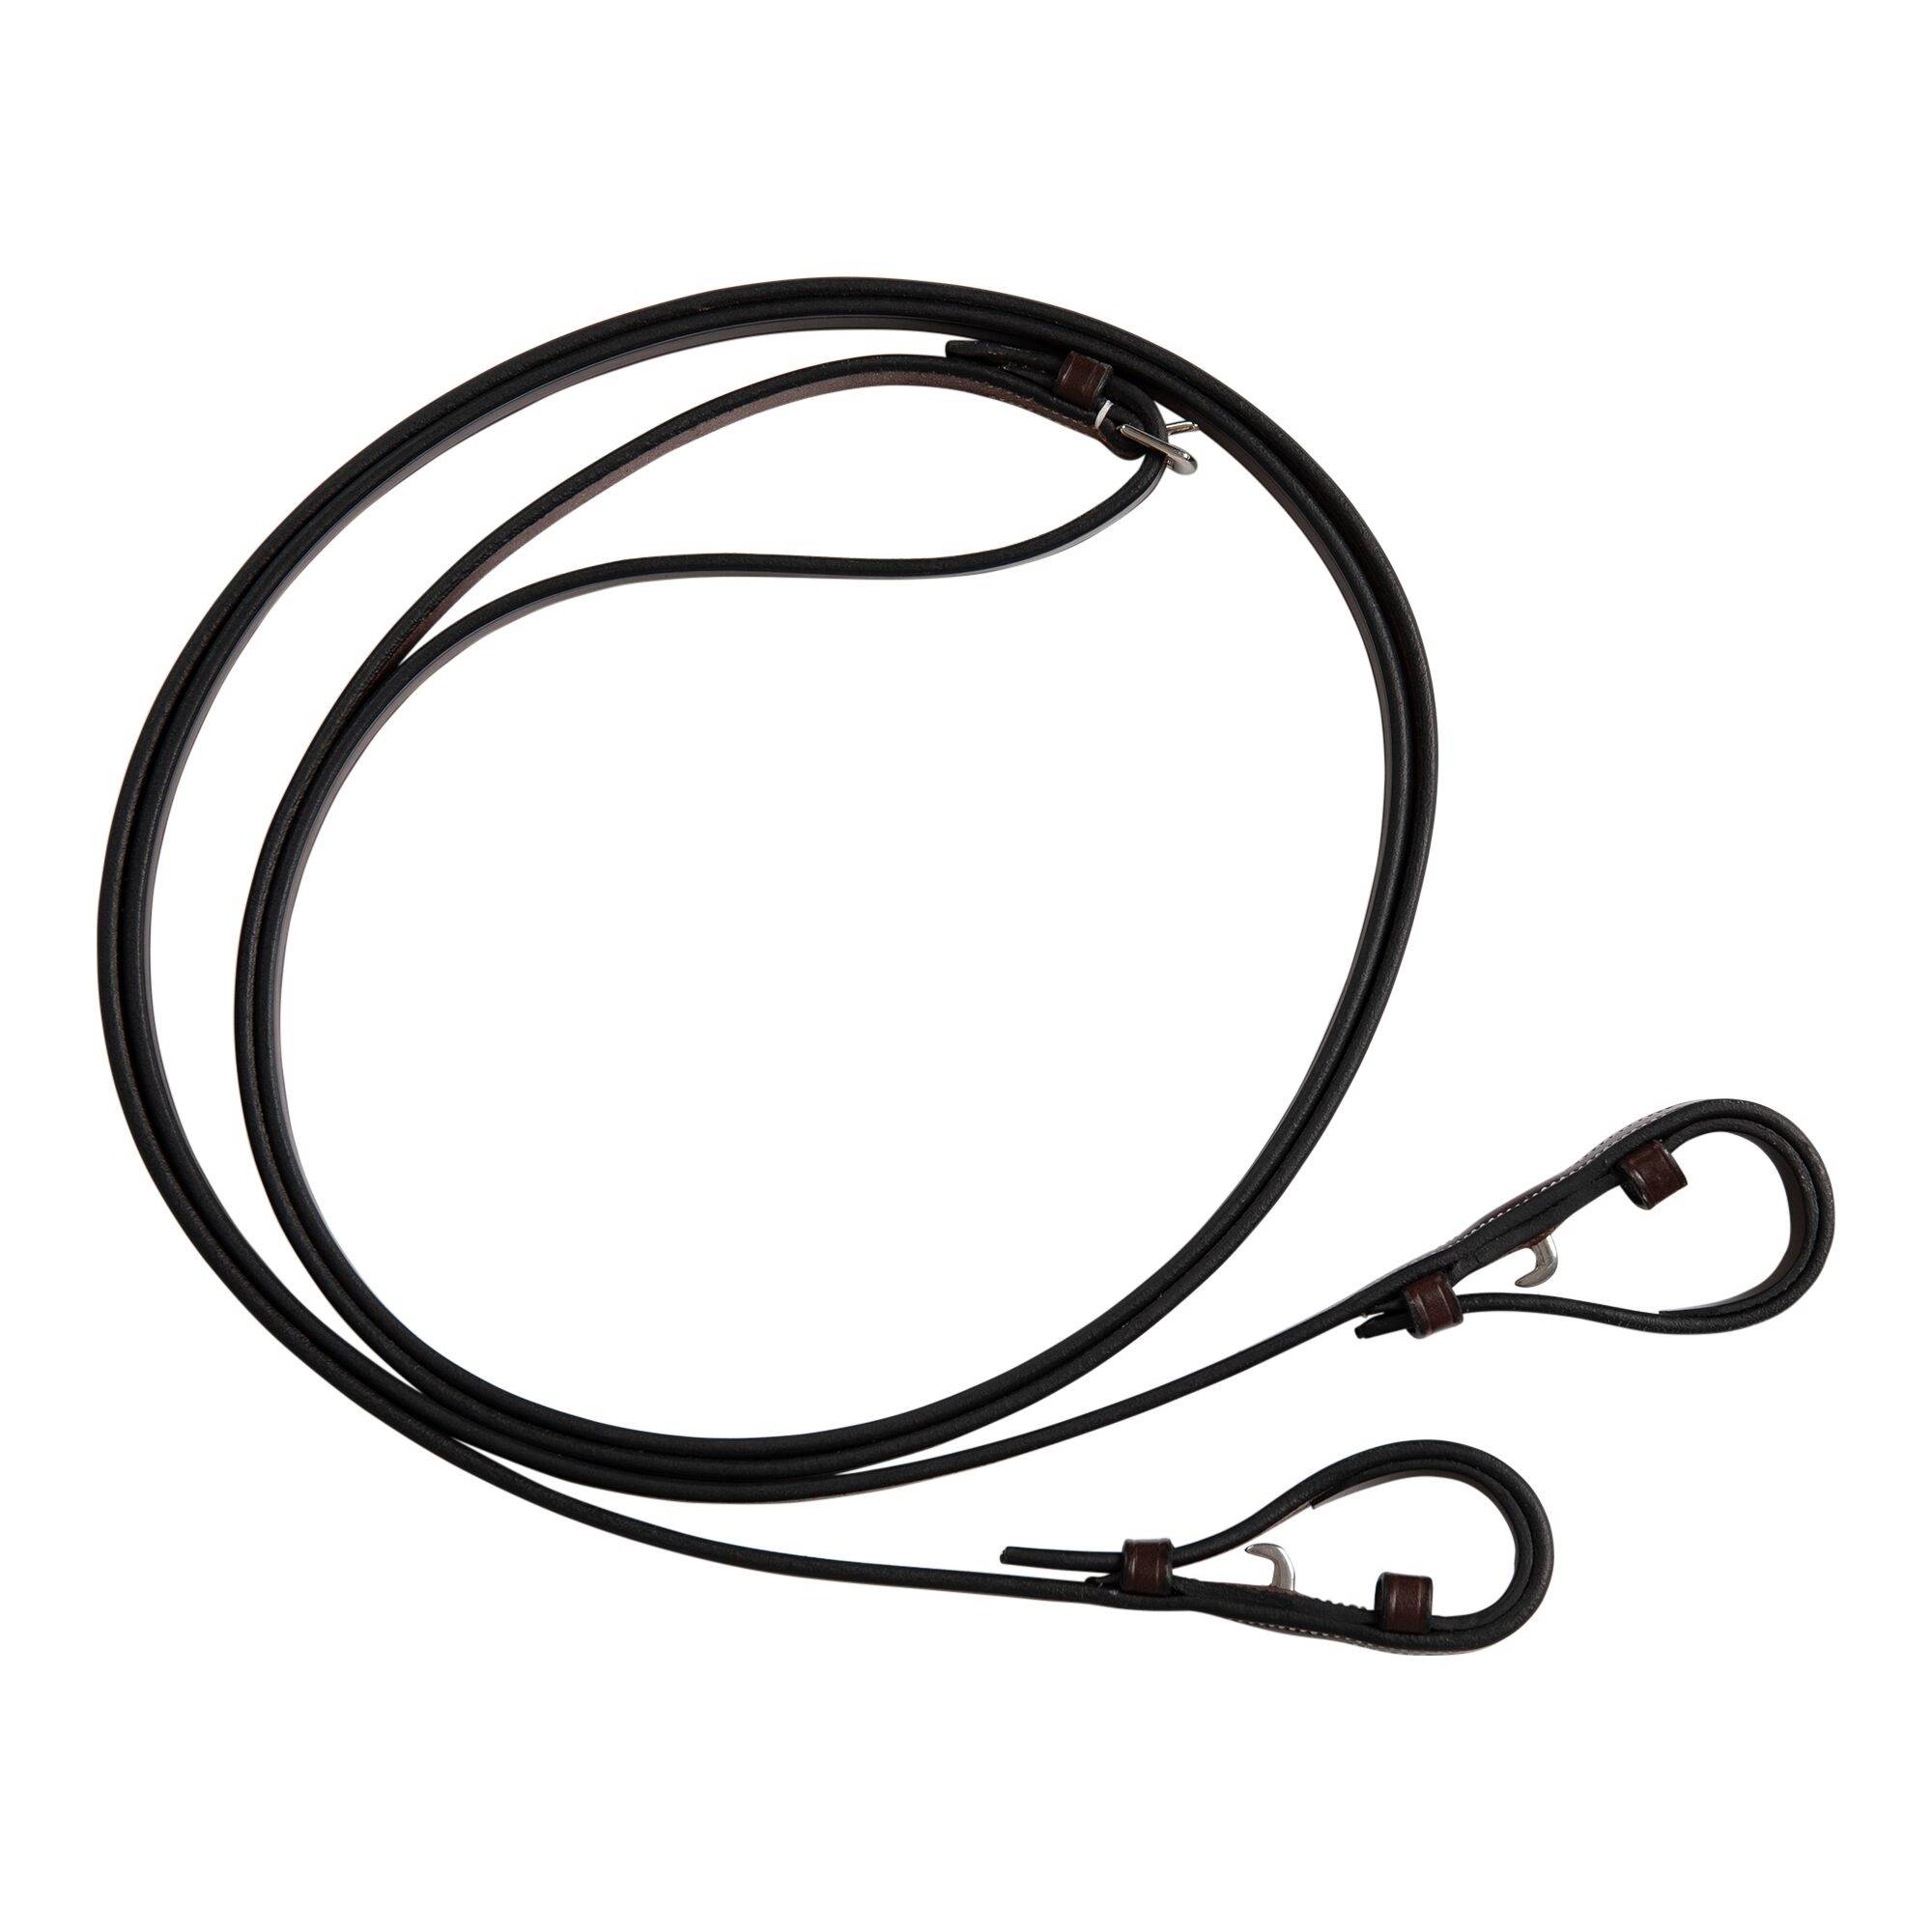 Huntley Equestrian Fancy Stitched Rubber Reins, 5/8 Width